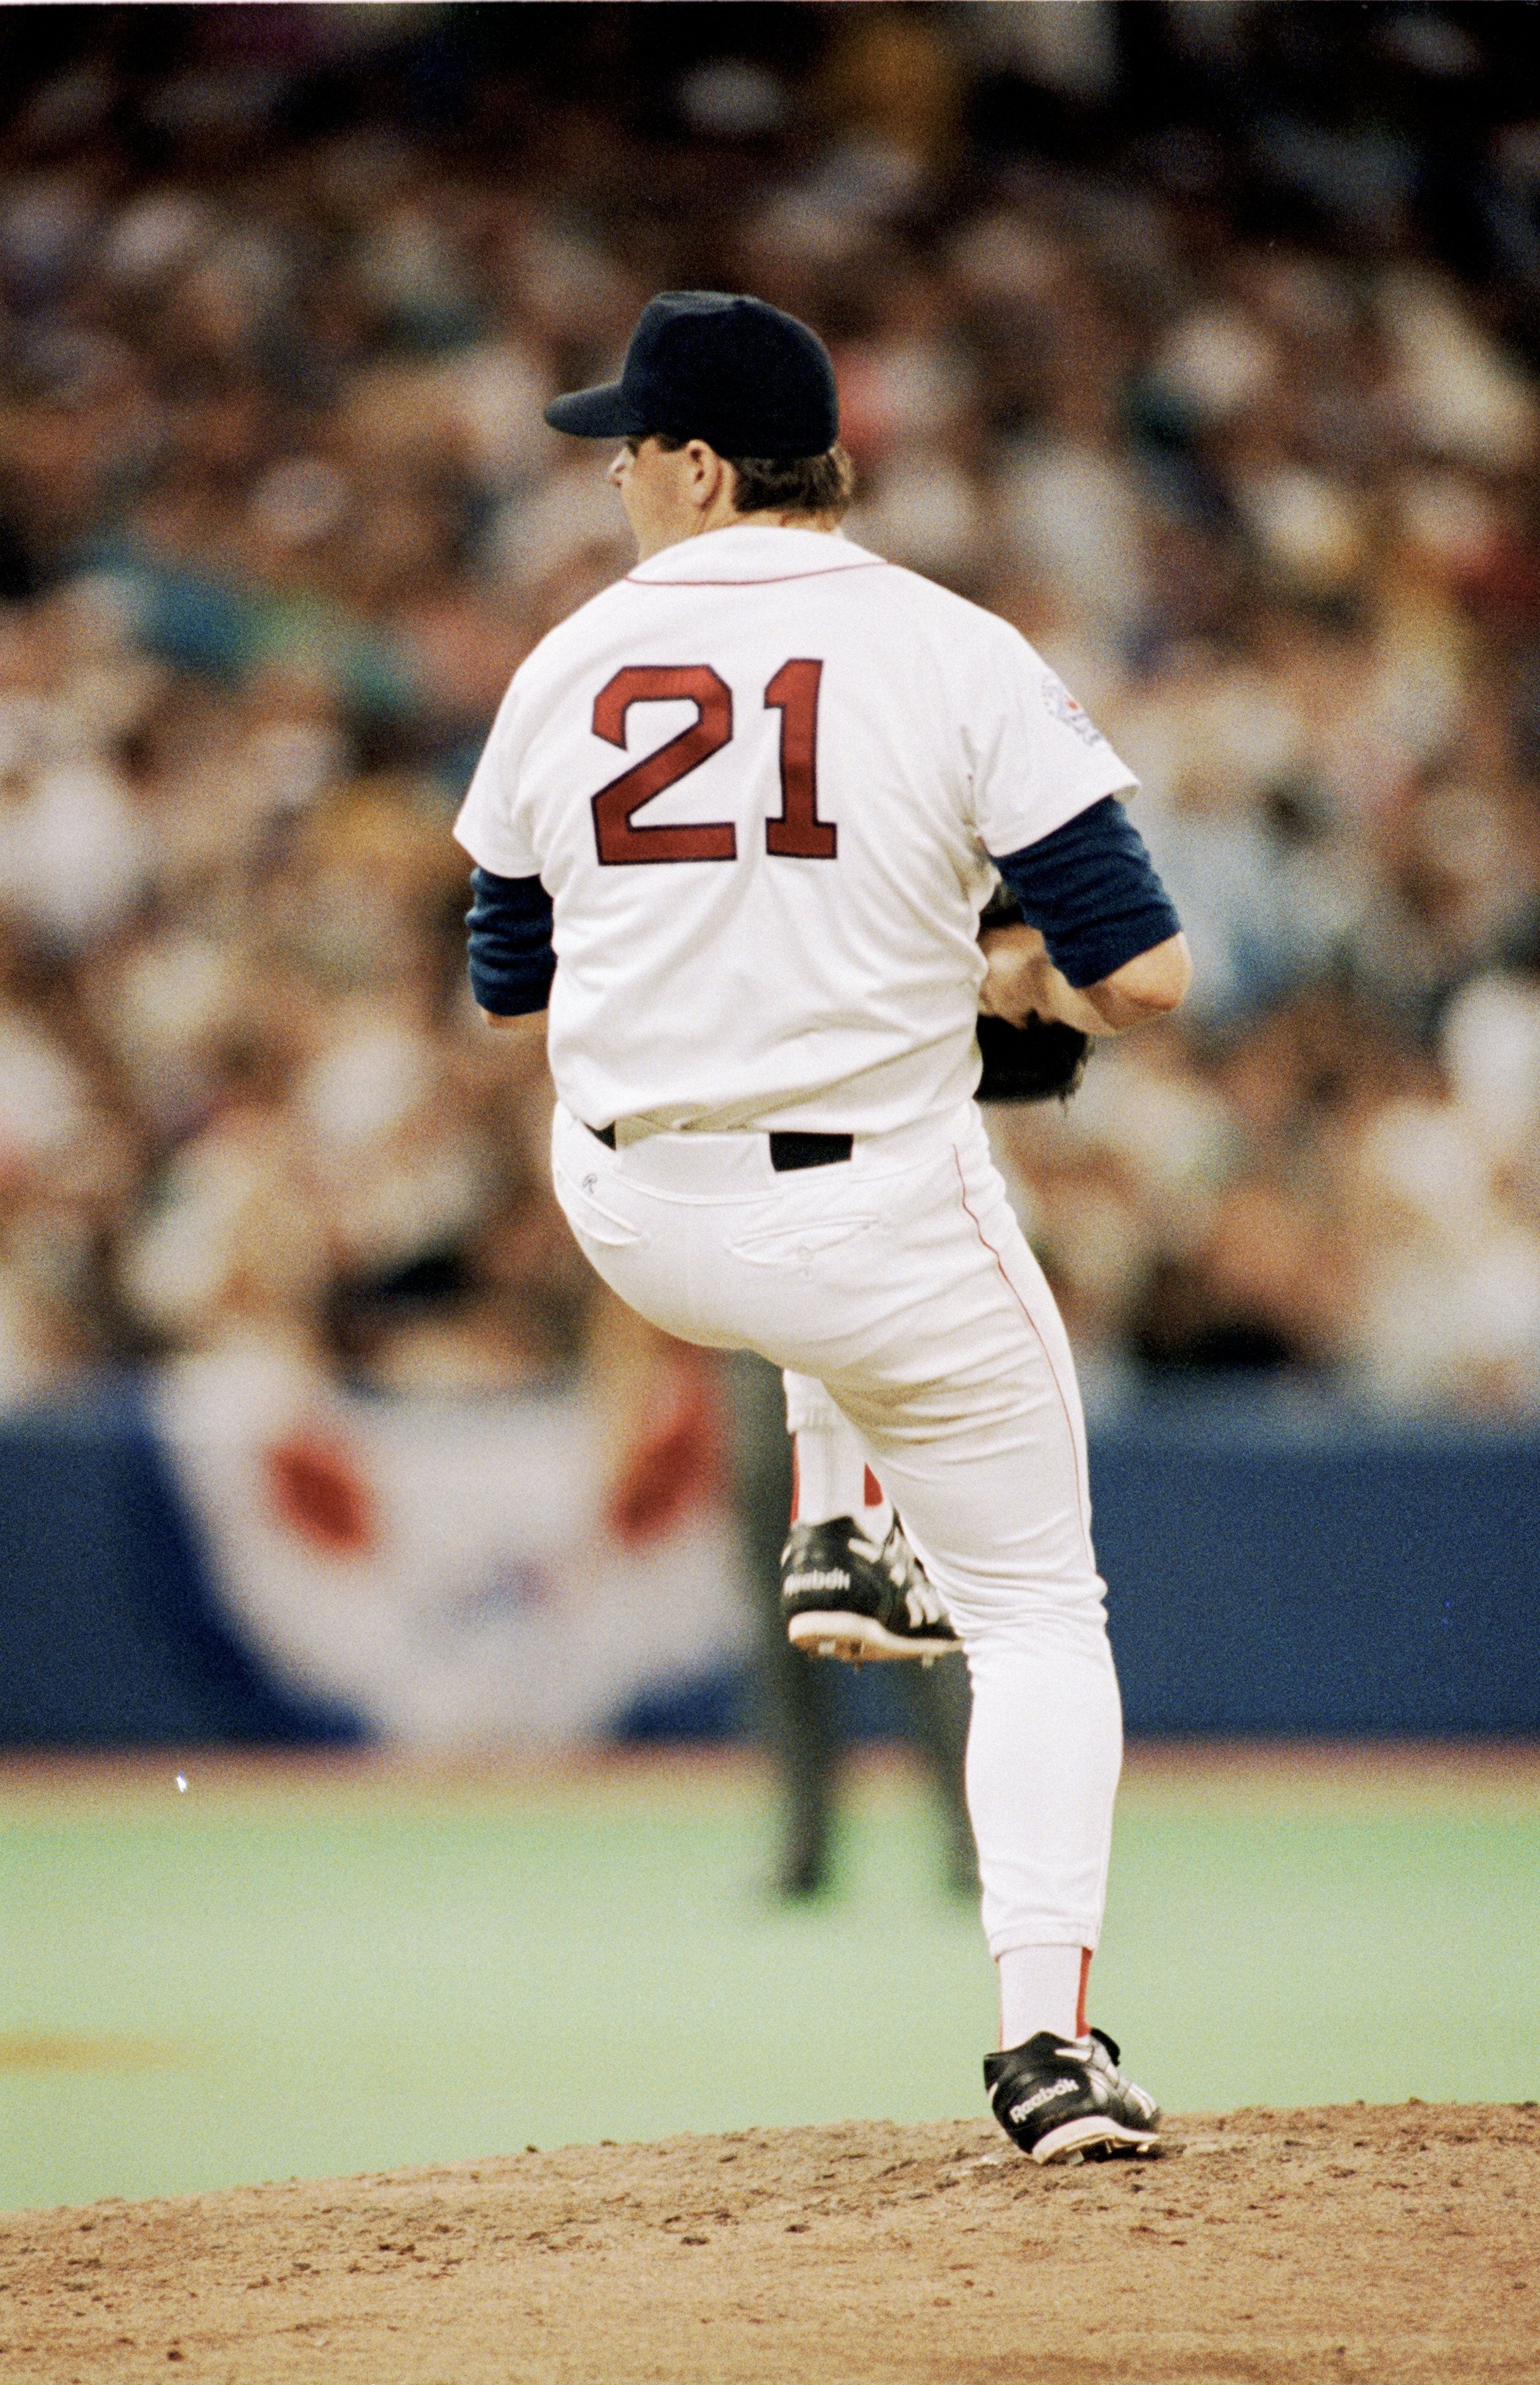 Red Sox should not honor Wade Boggs ahead of Dwight Evans - Over